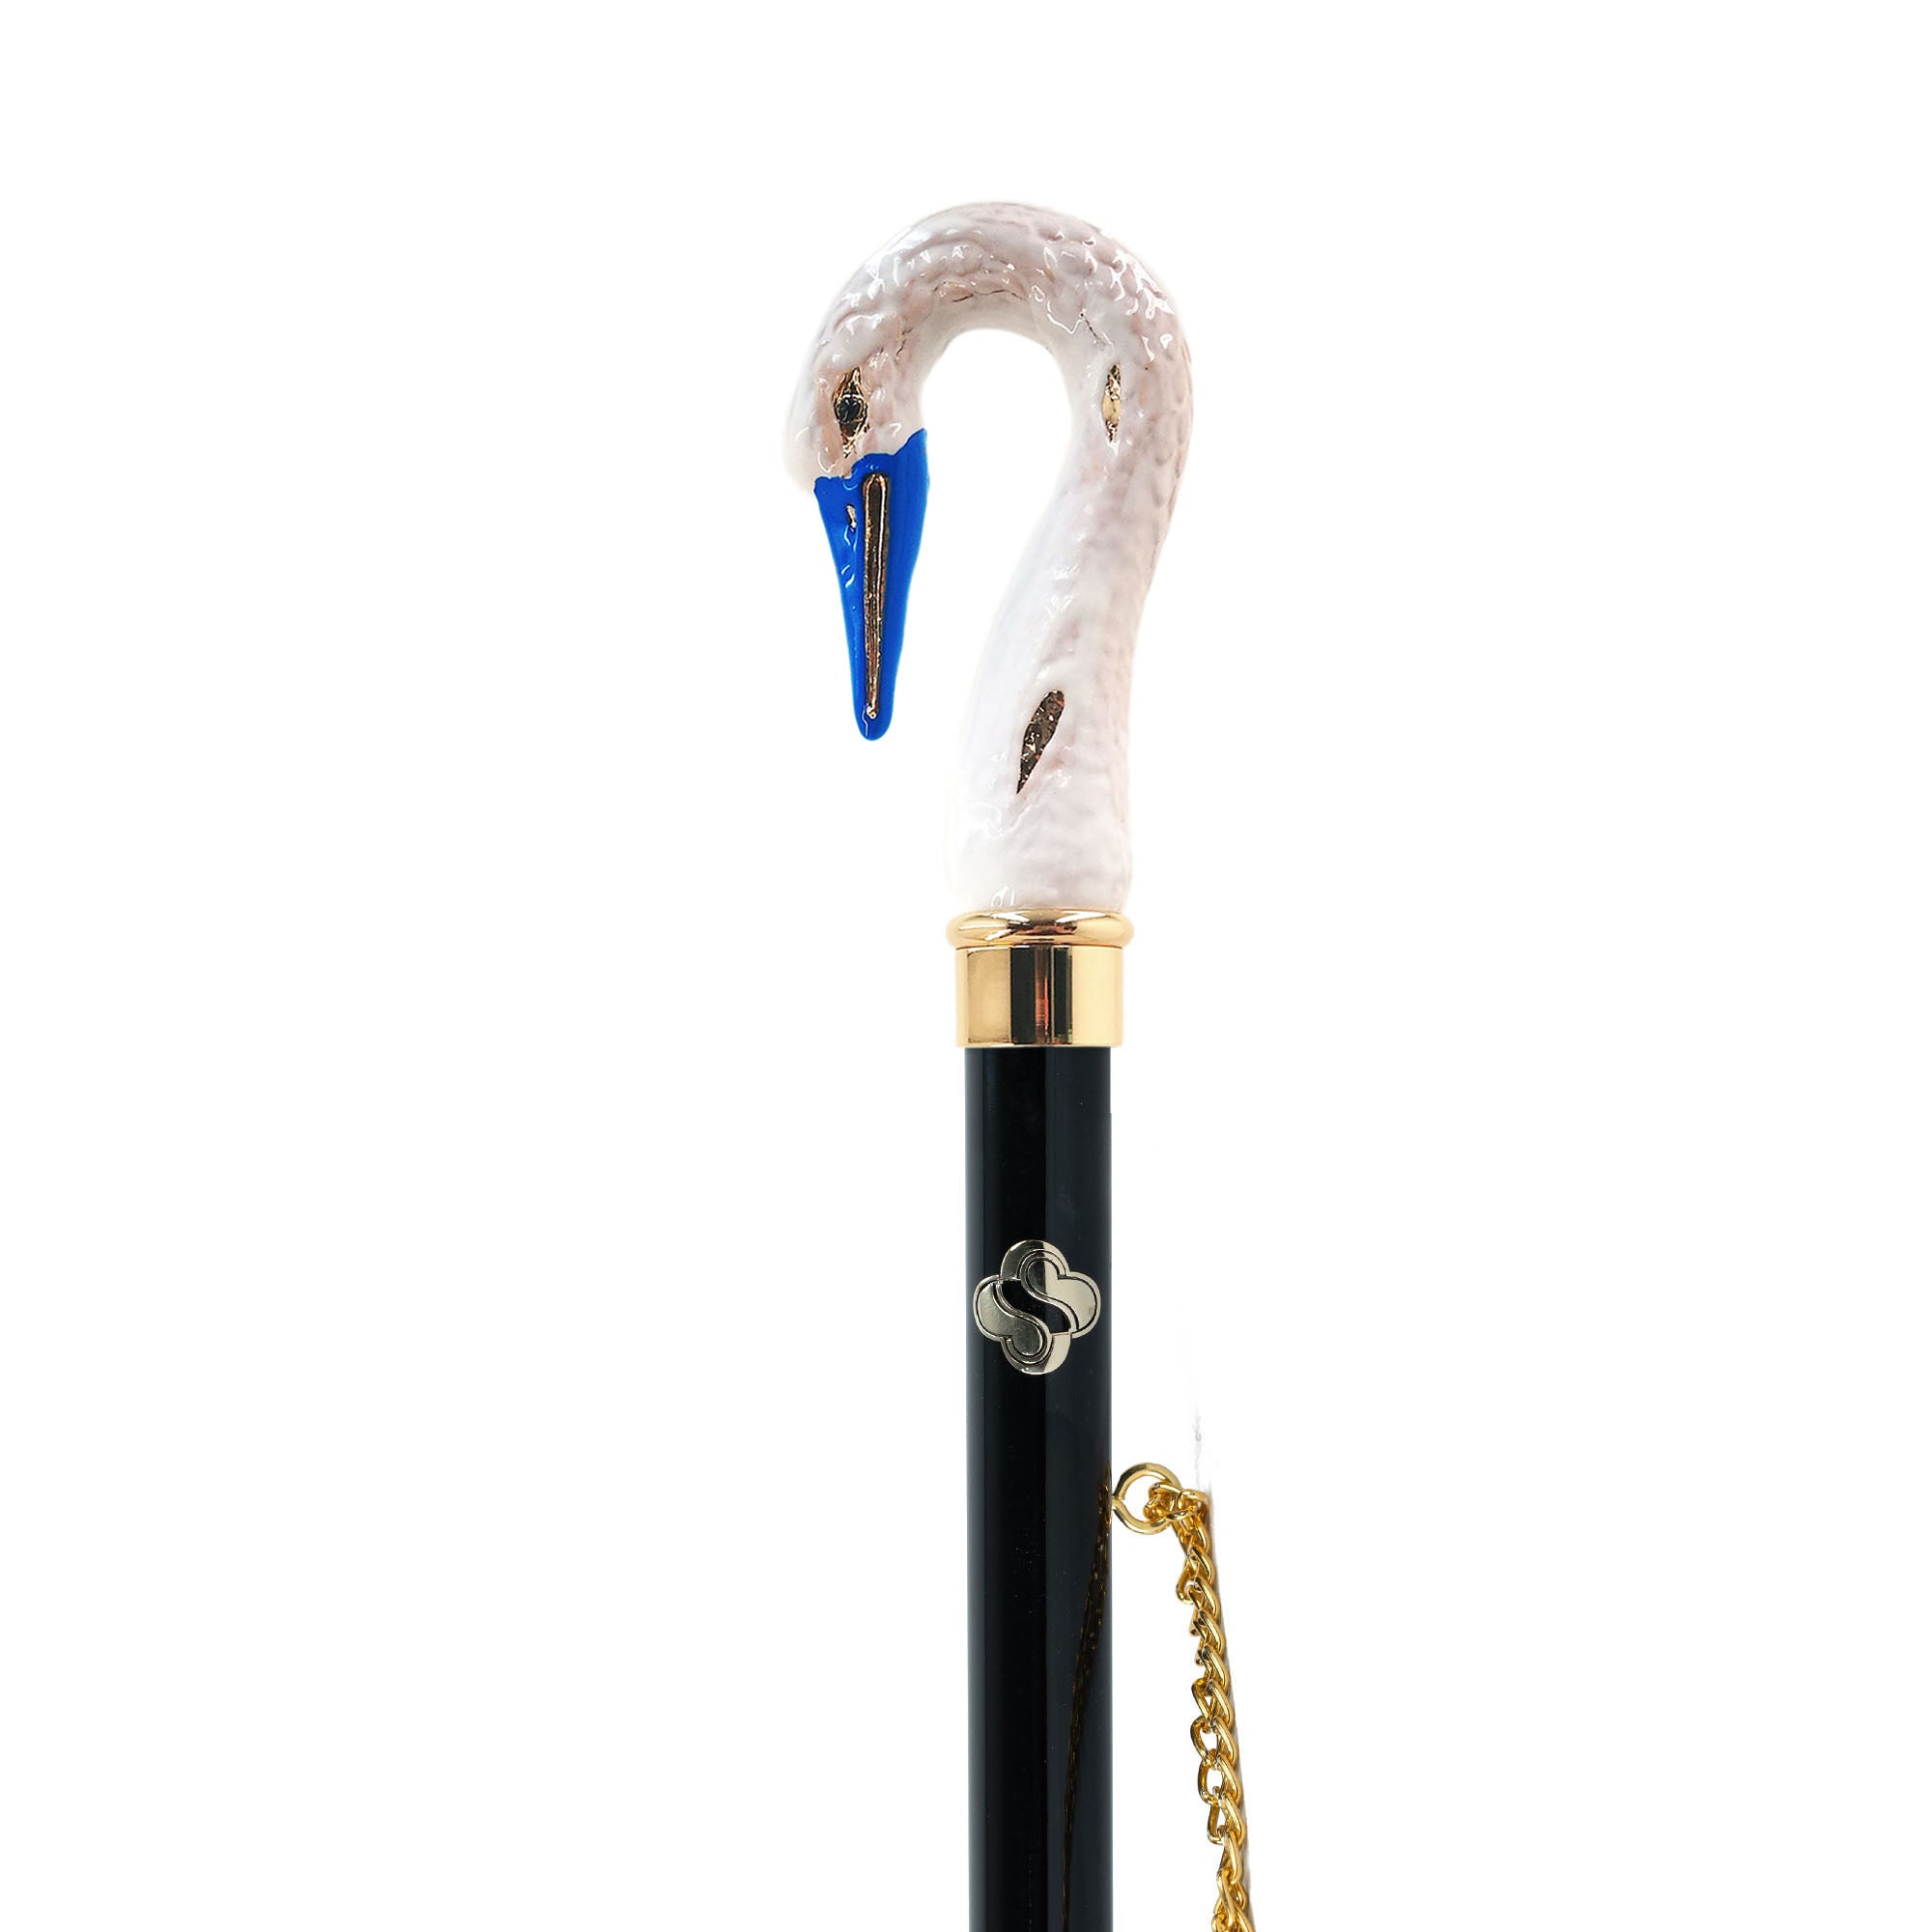 Swan Serenity: Hand-Painted 24K Gold-Plated Swan Shoehorn